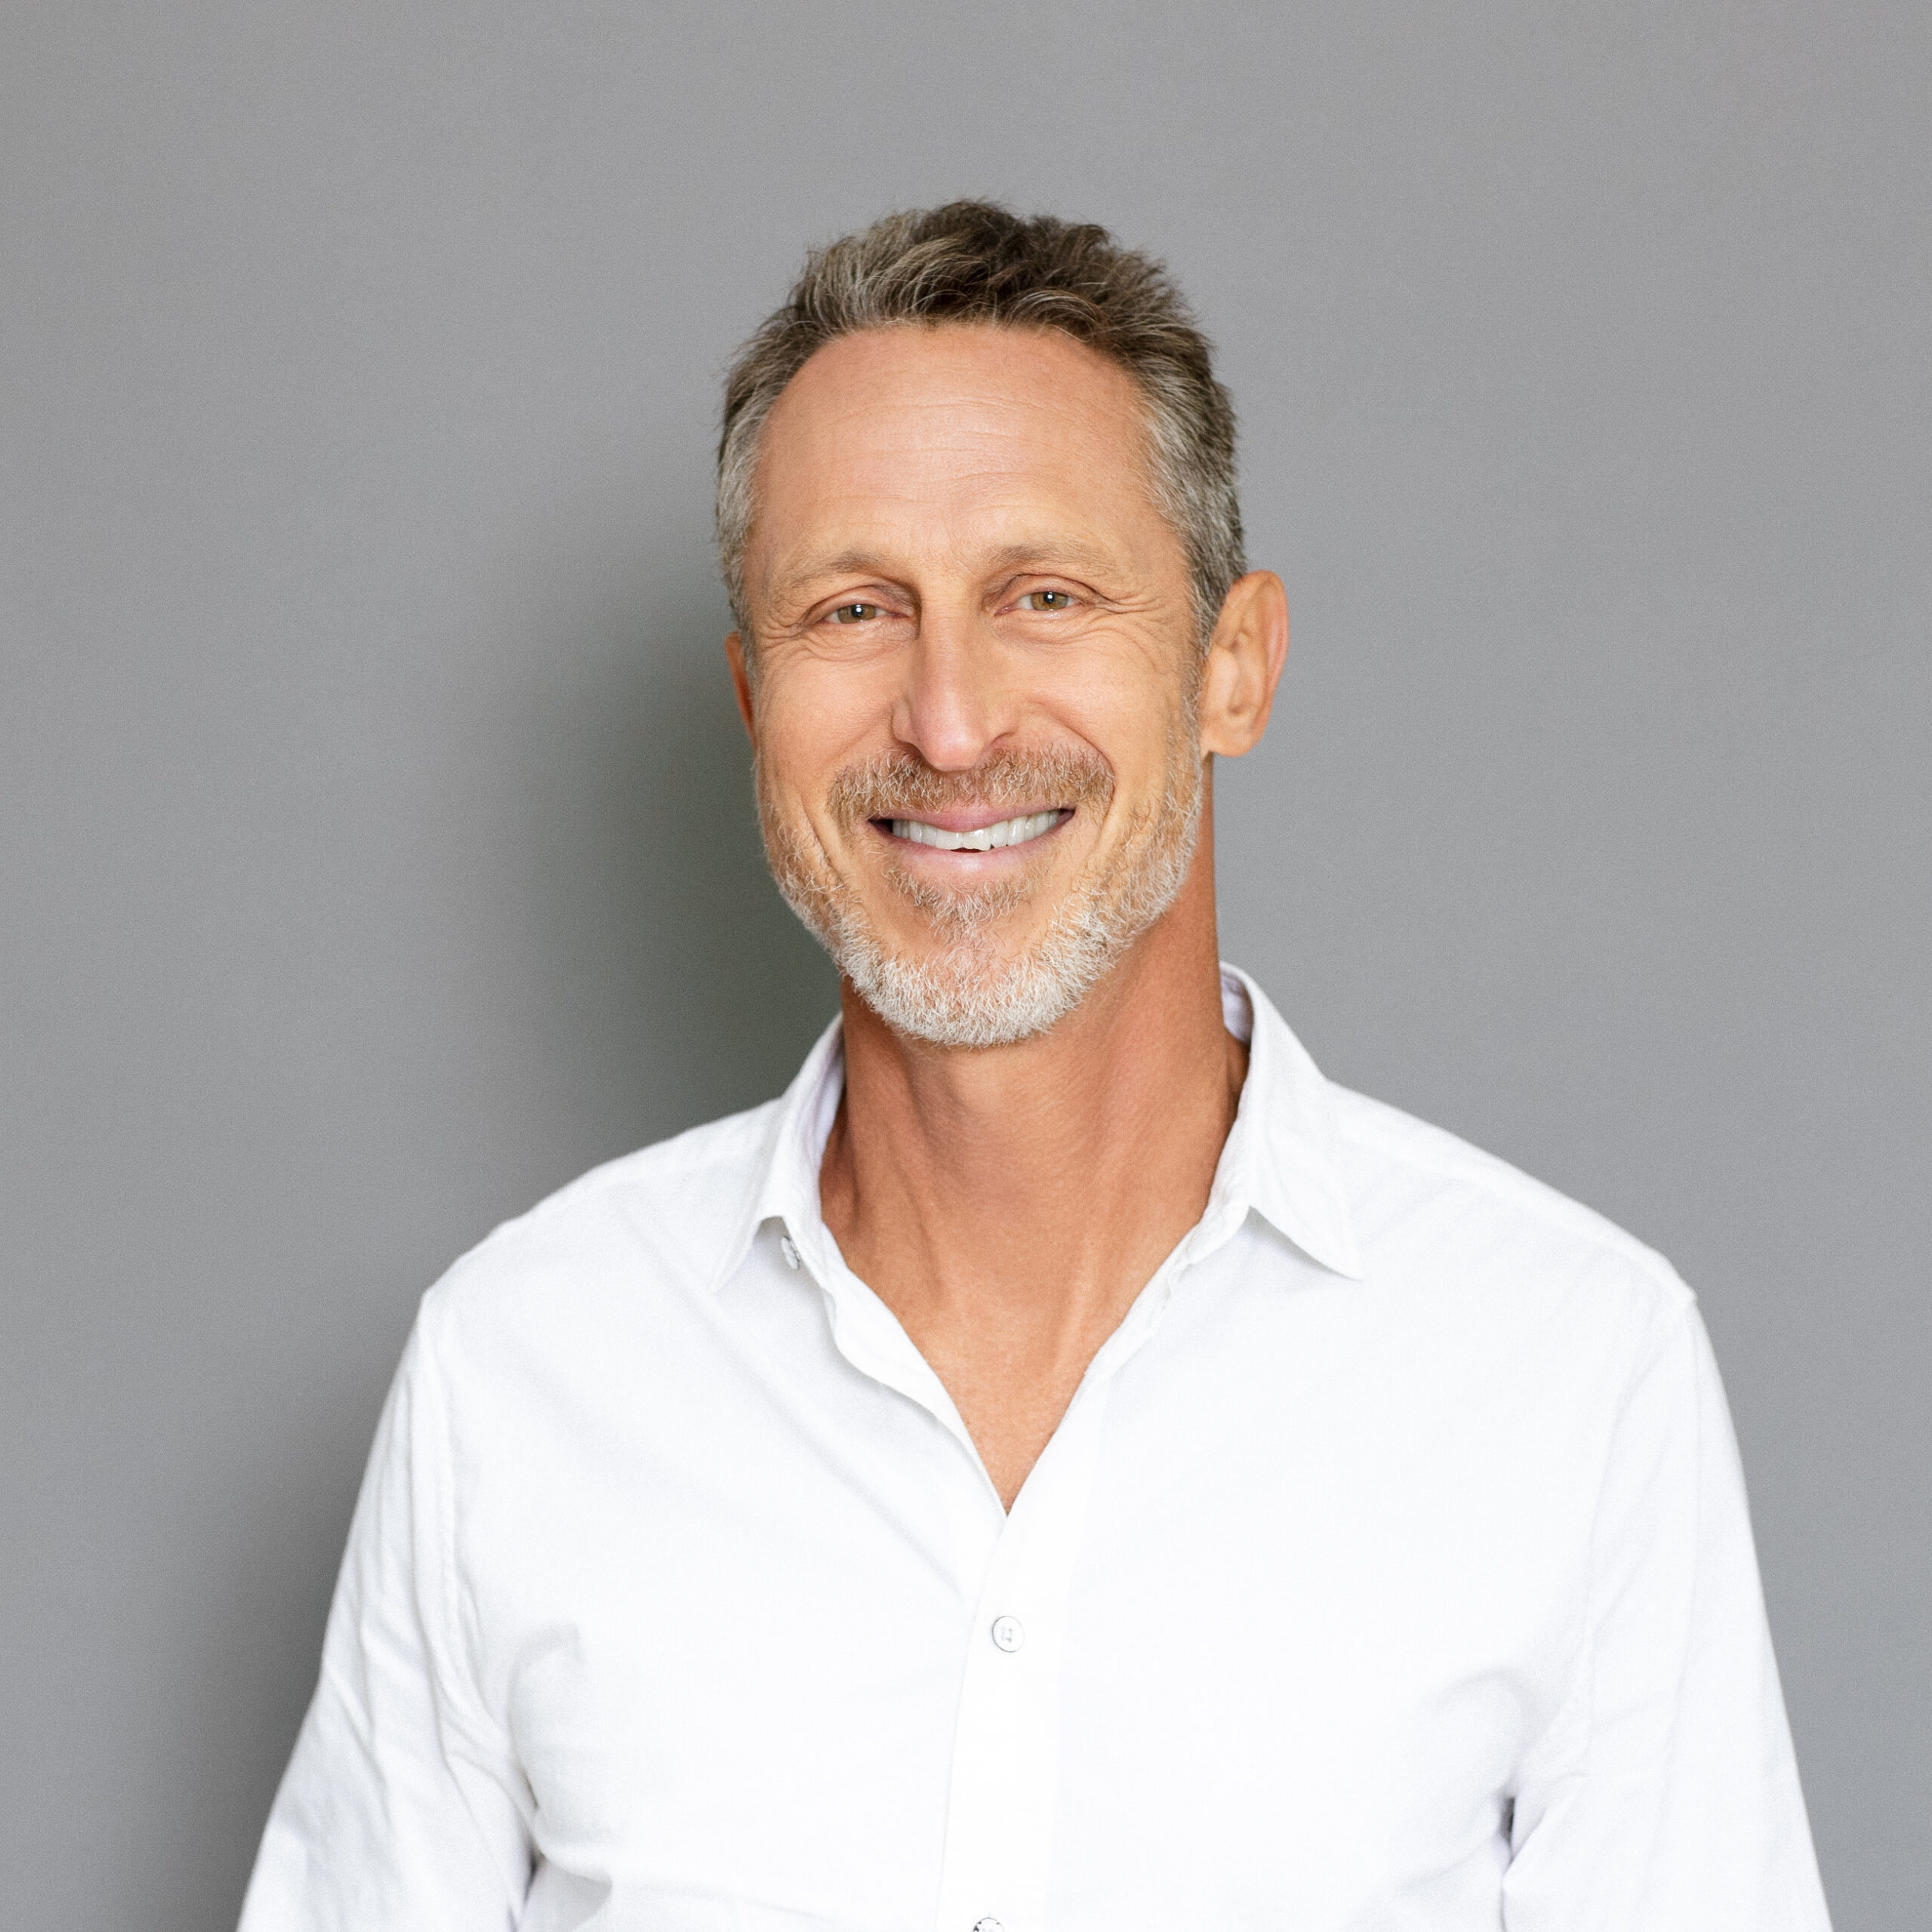 Doctor Mark Hyman describes Marc David as the leading voice for eating psychology - the connection between stress, digestion, weight, and health.